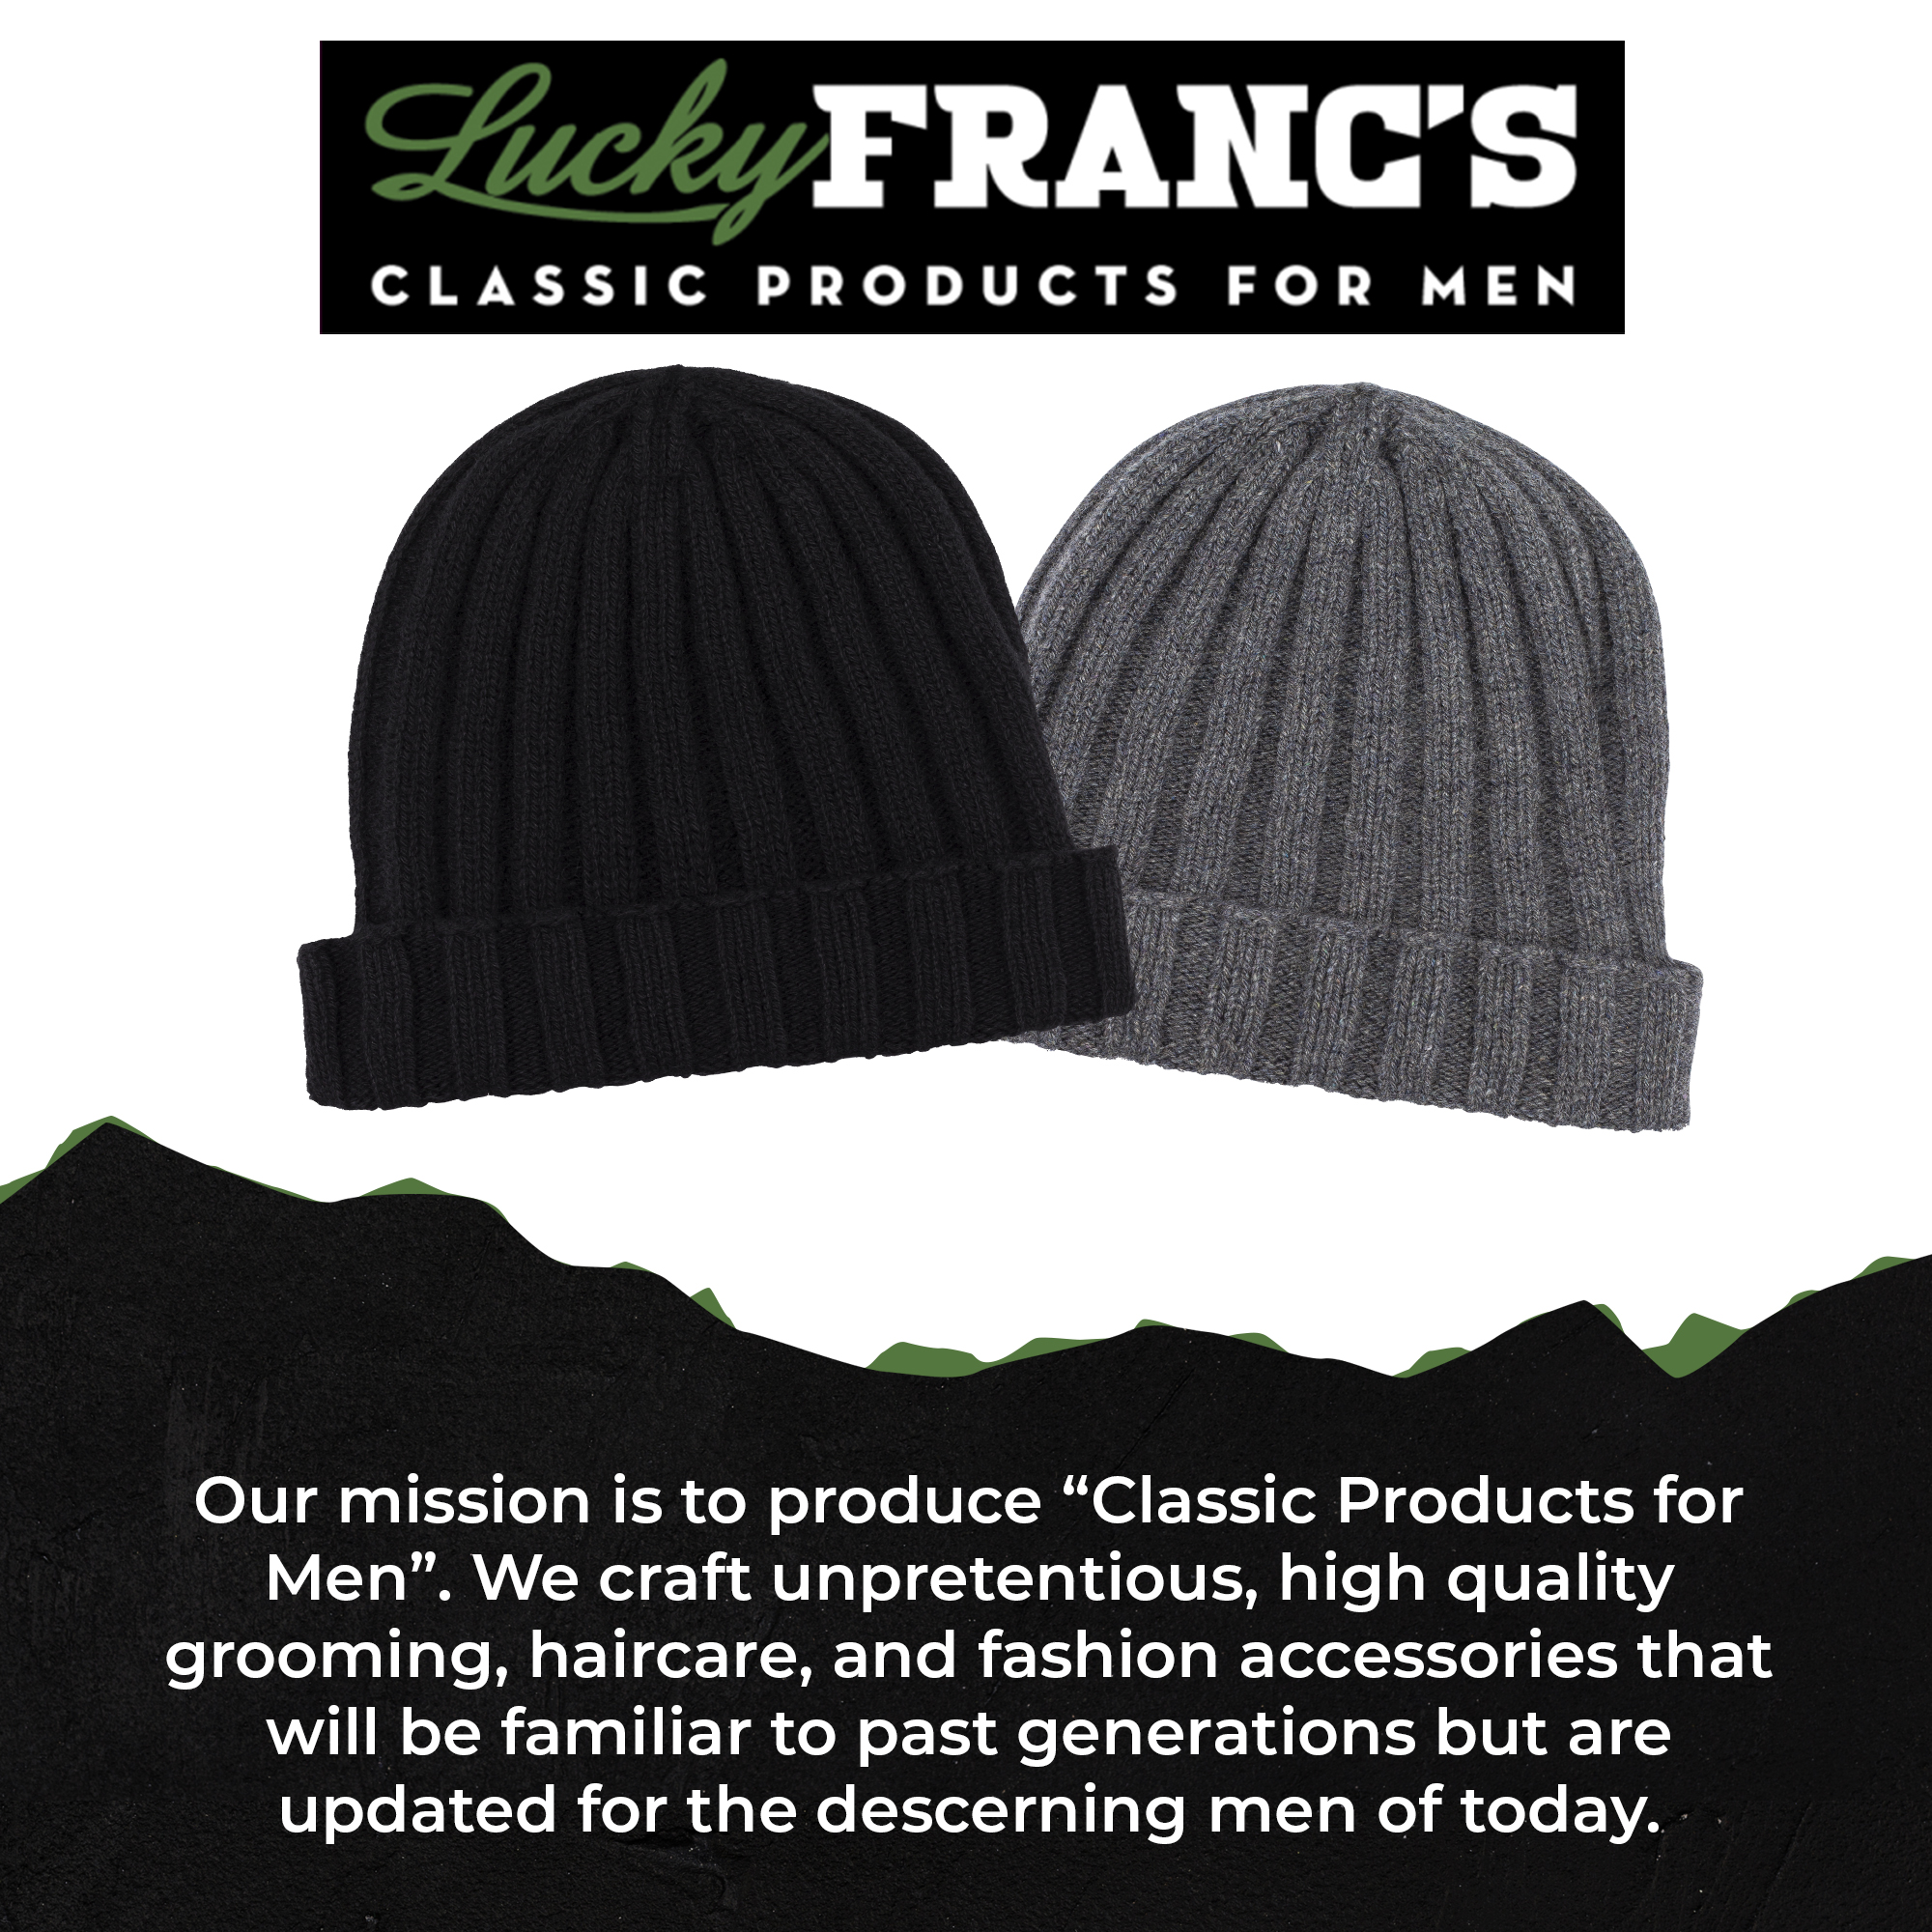 100% Cashmere Beanie For Men Made in Italy - Lucky Franc's